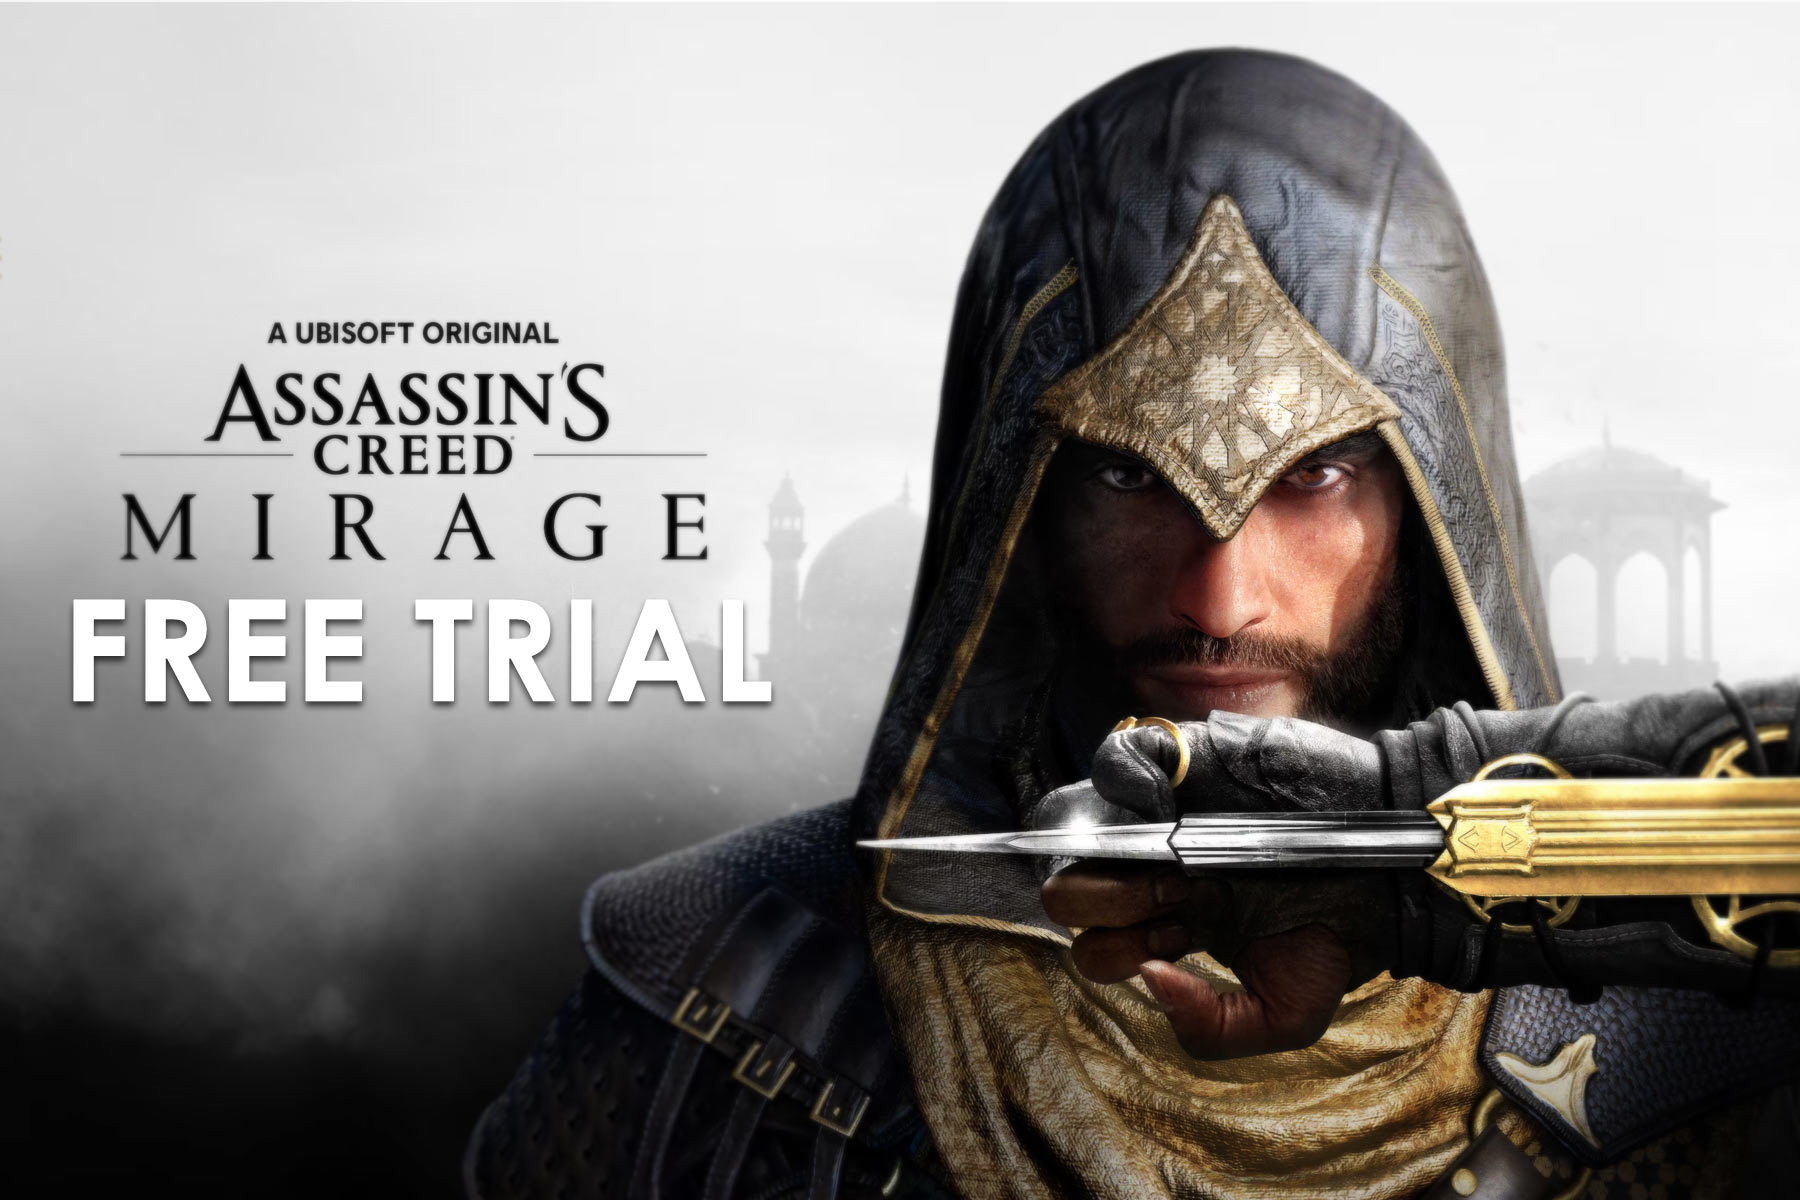 Get ready Assassin’s Creed fans! Mirage is now available for a free trial